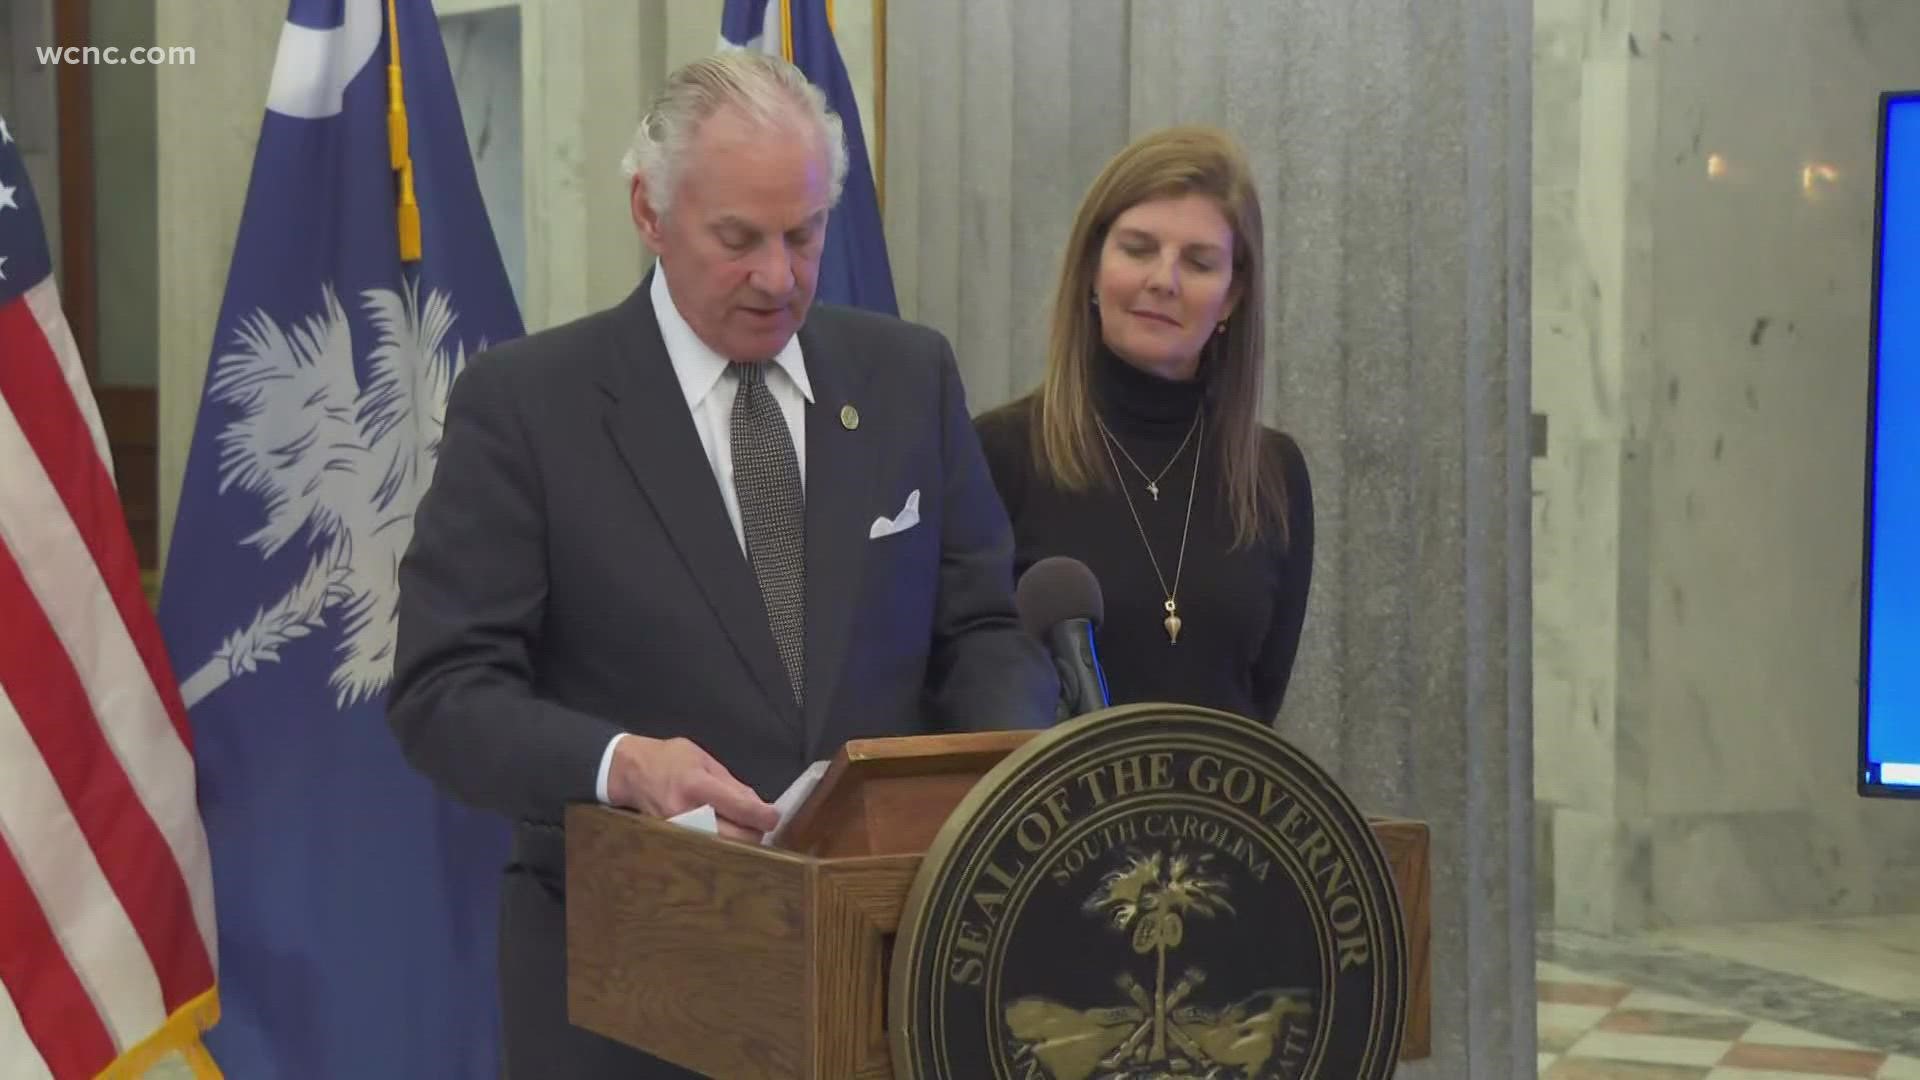 Monday, Gov. McMaster laid out his plans for how to spend more than $5 billion.